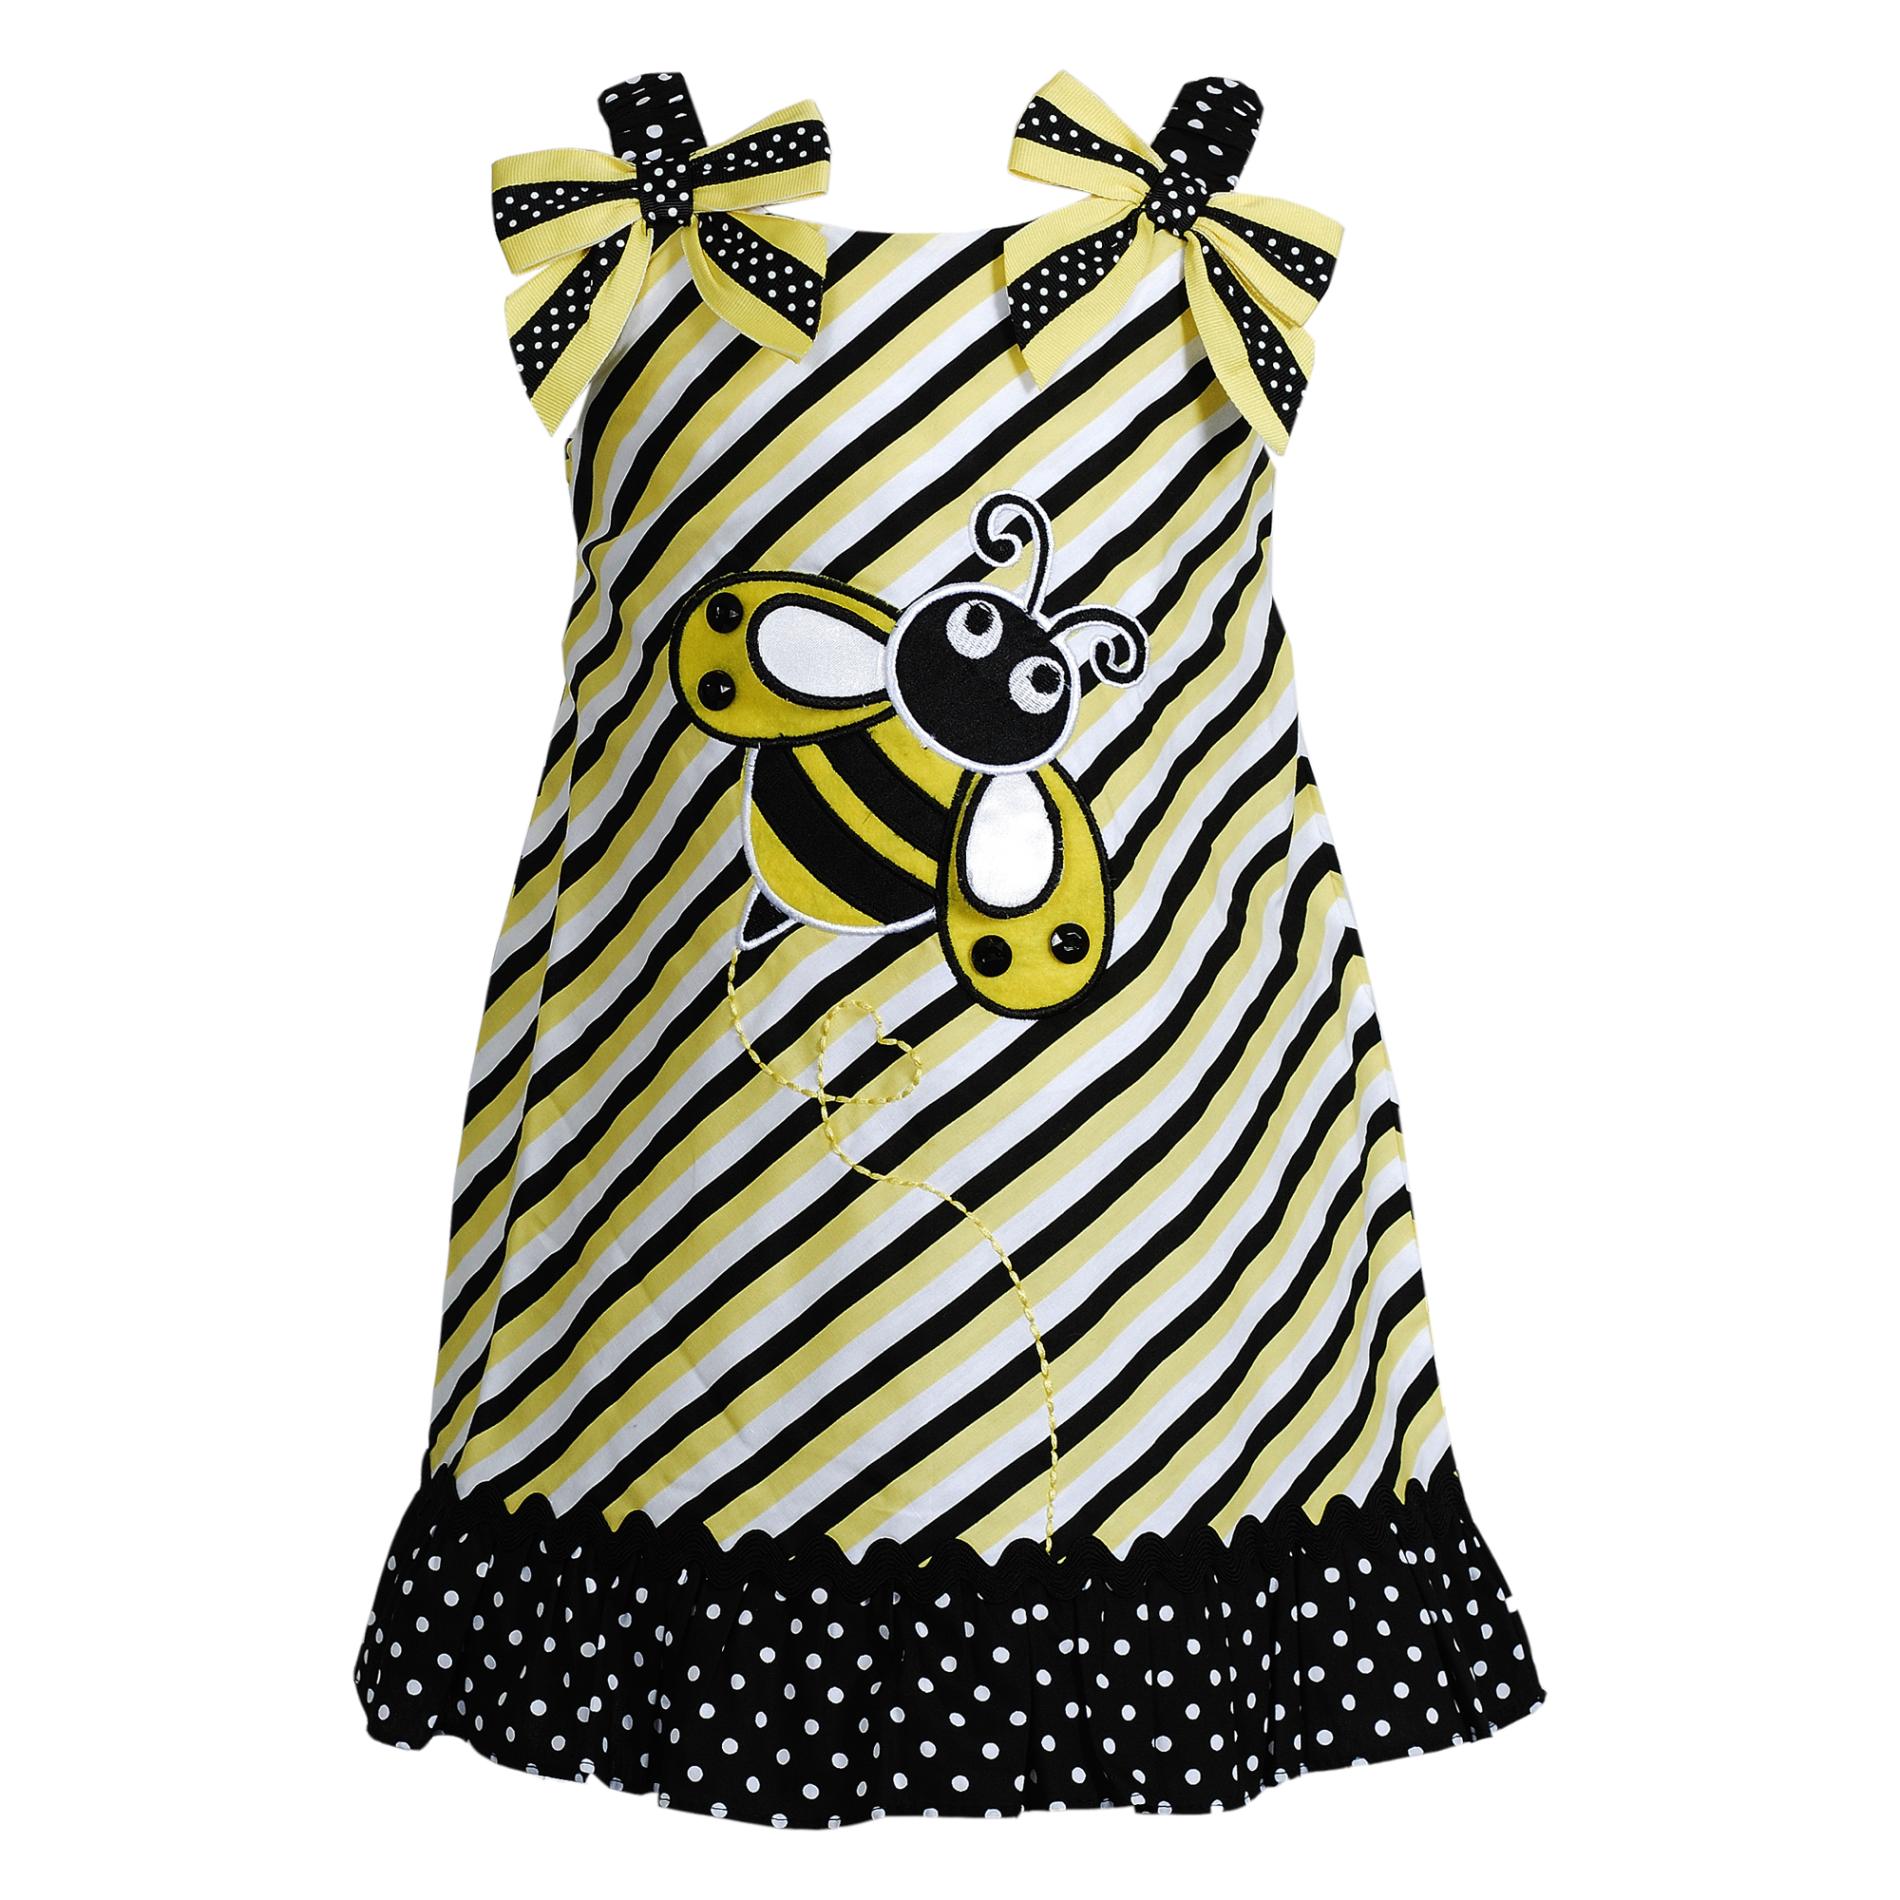 Youngland Infant & Toddler Girl's Sundress - Bumblebee & Striped